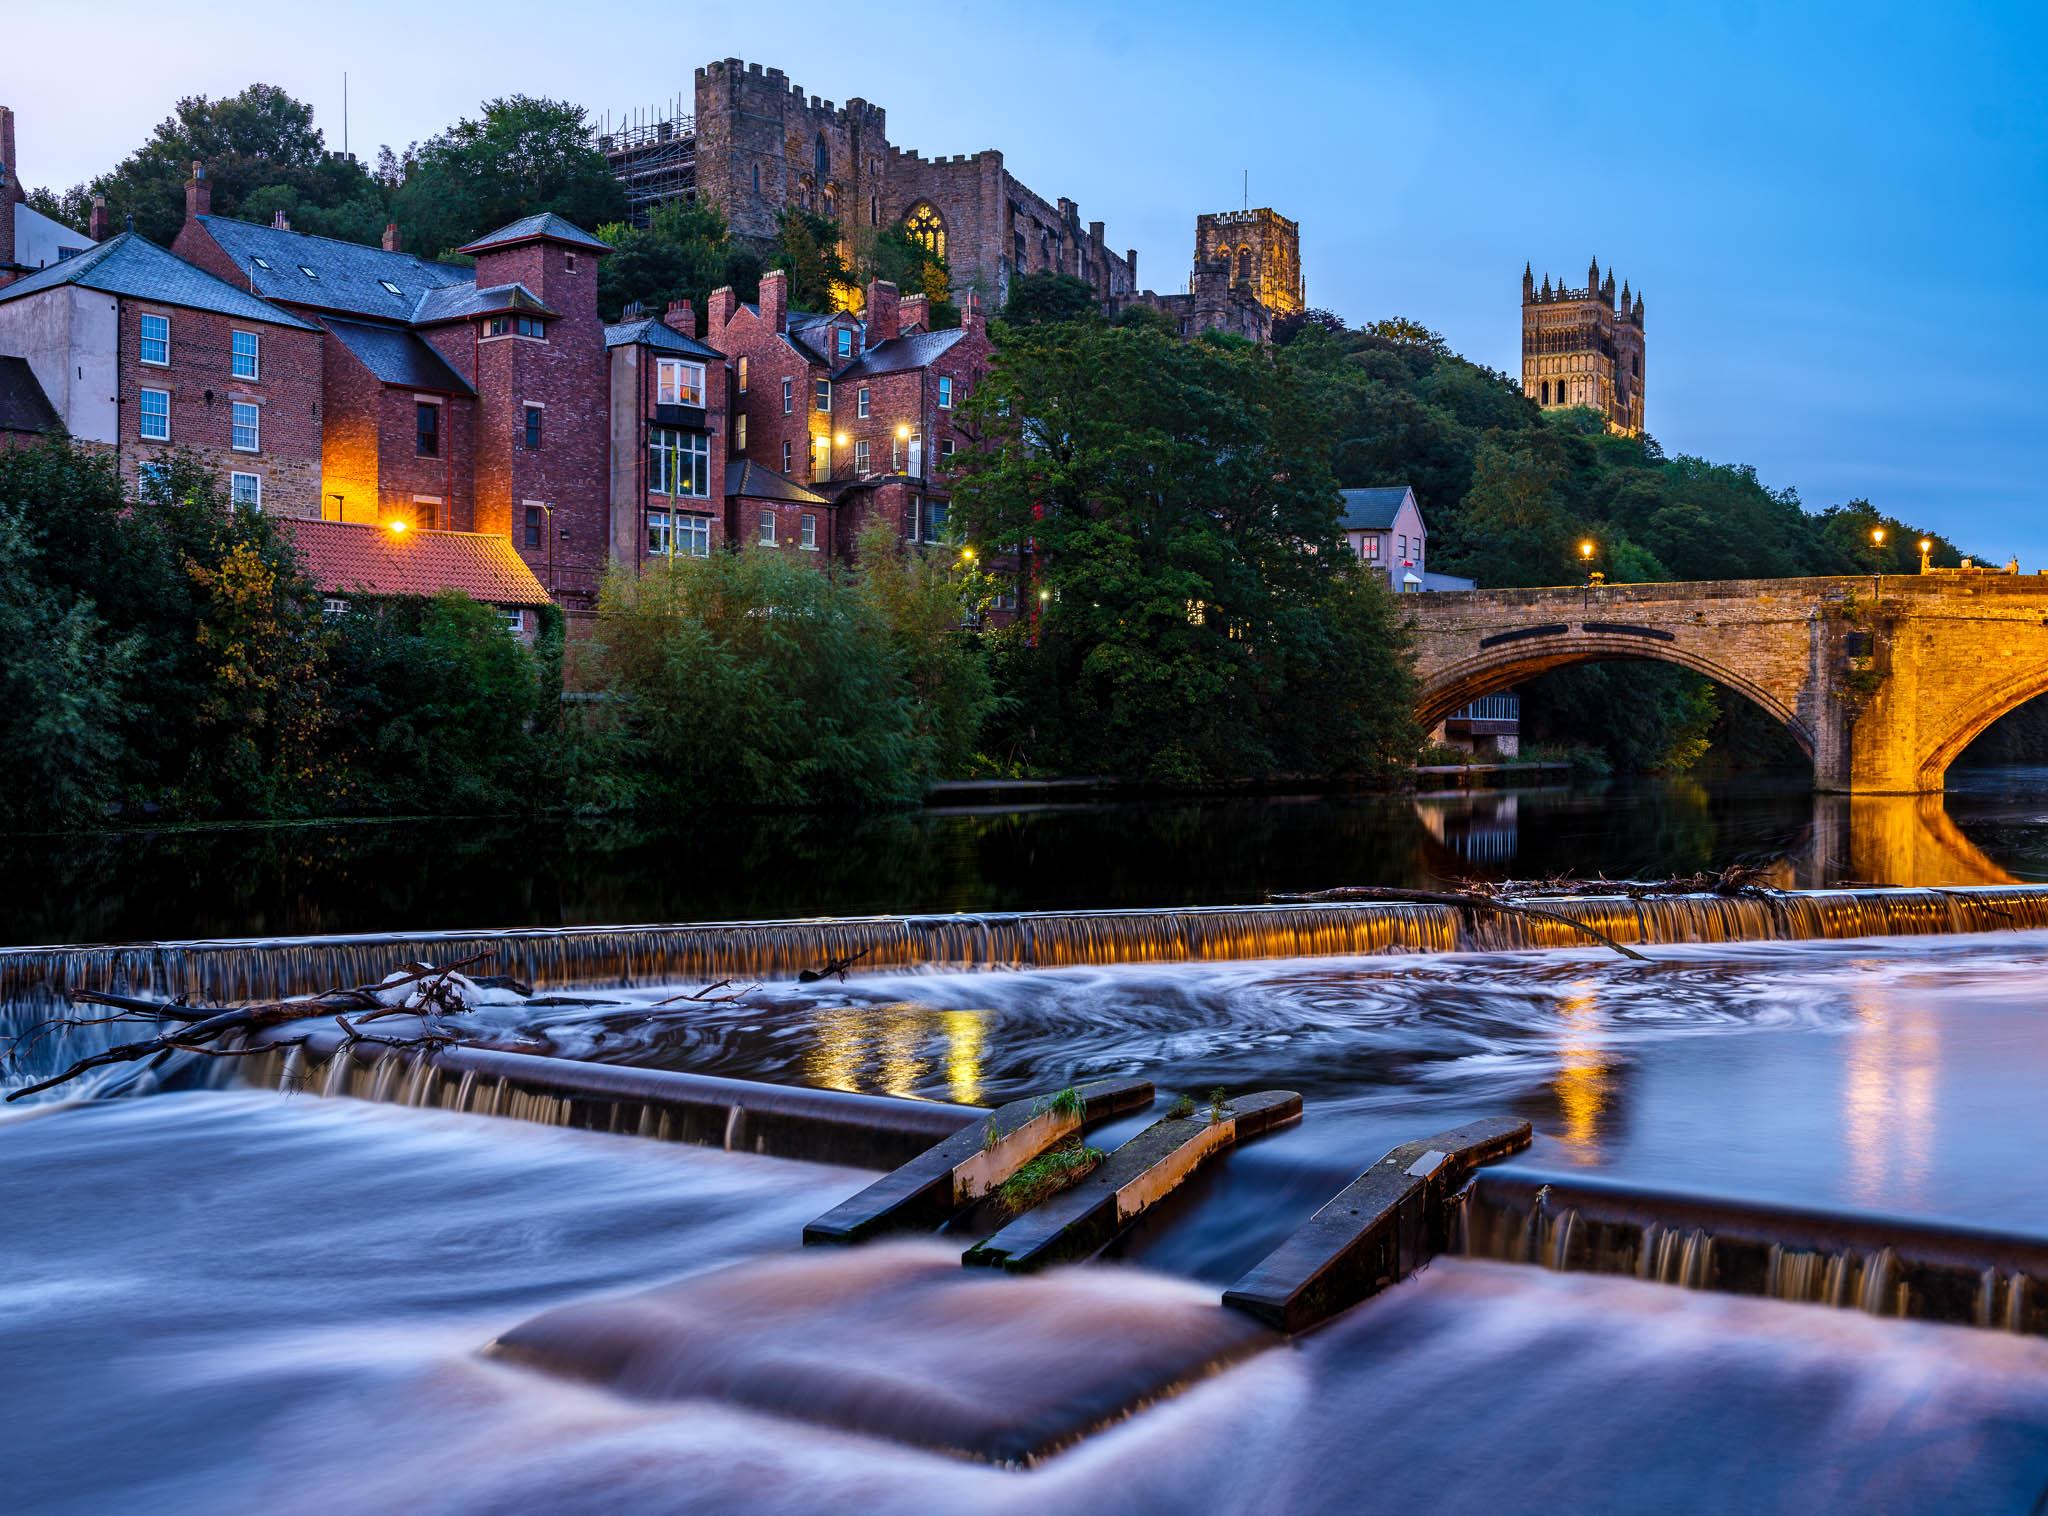 Predawn Blue Hour in Durham England with River Wear